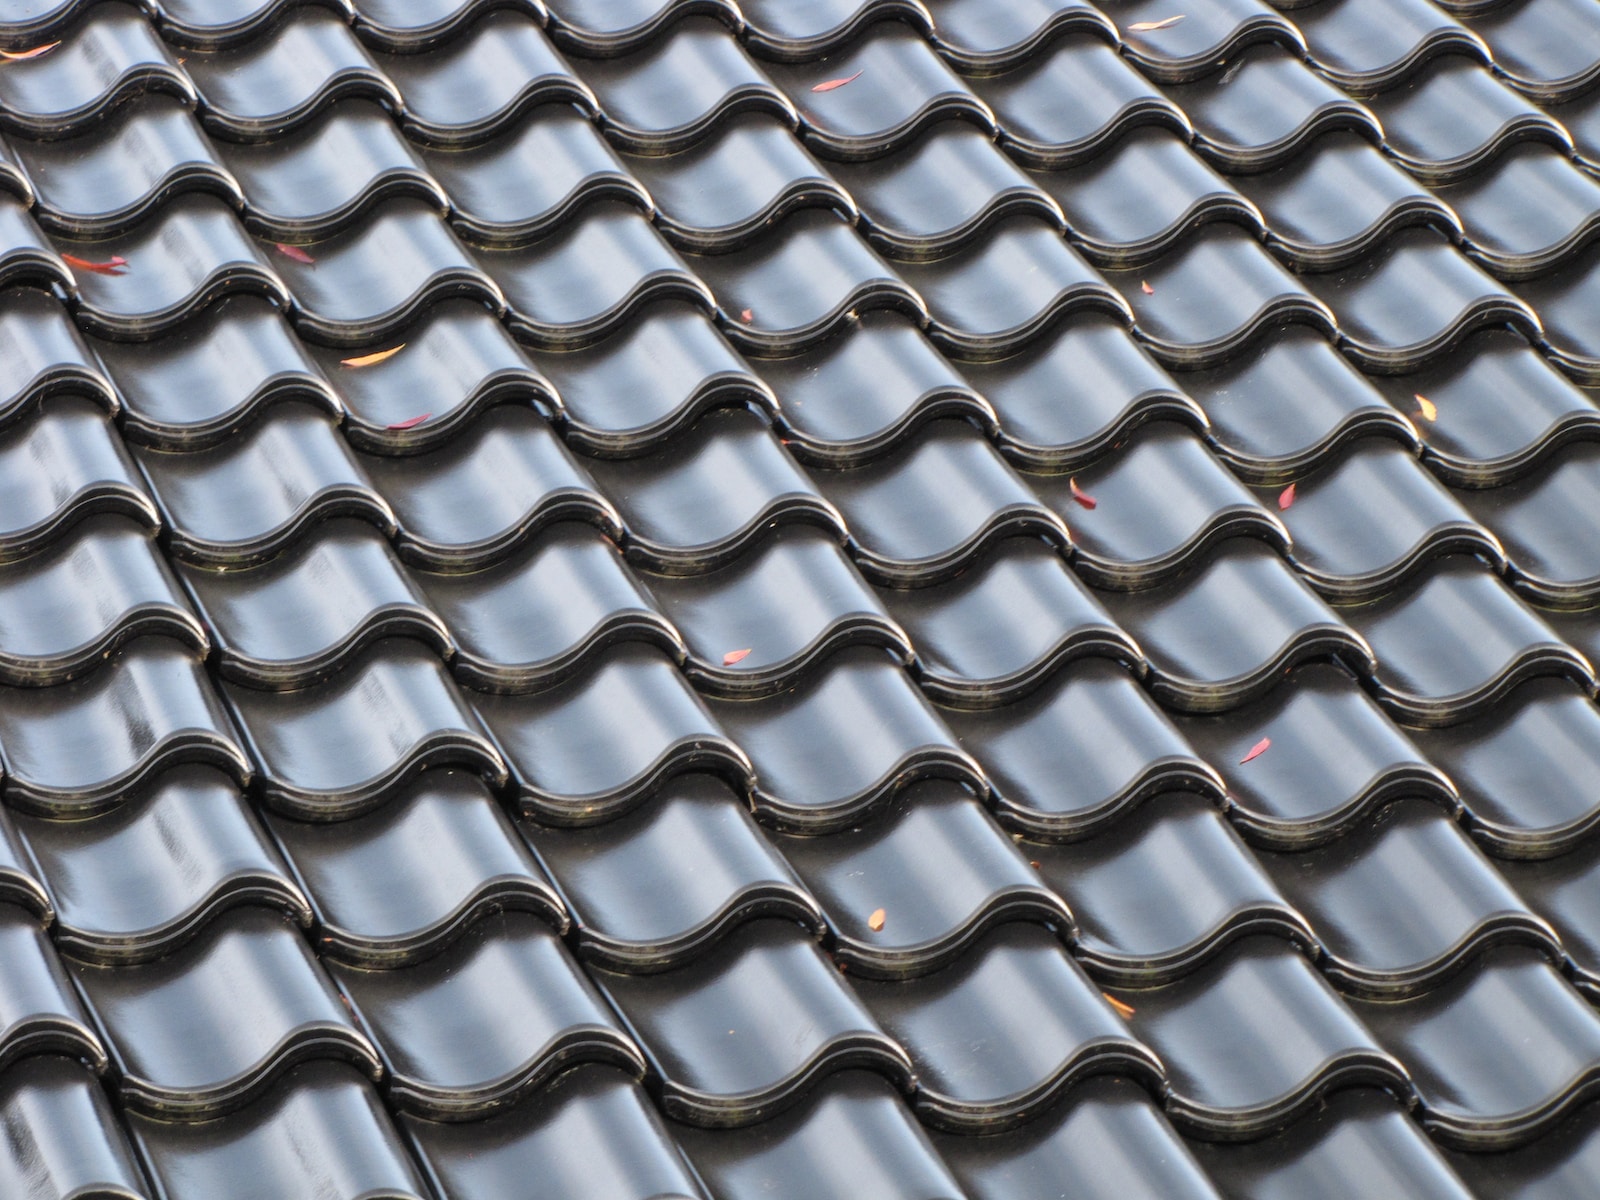 a close up view of a metal roof